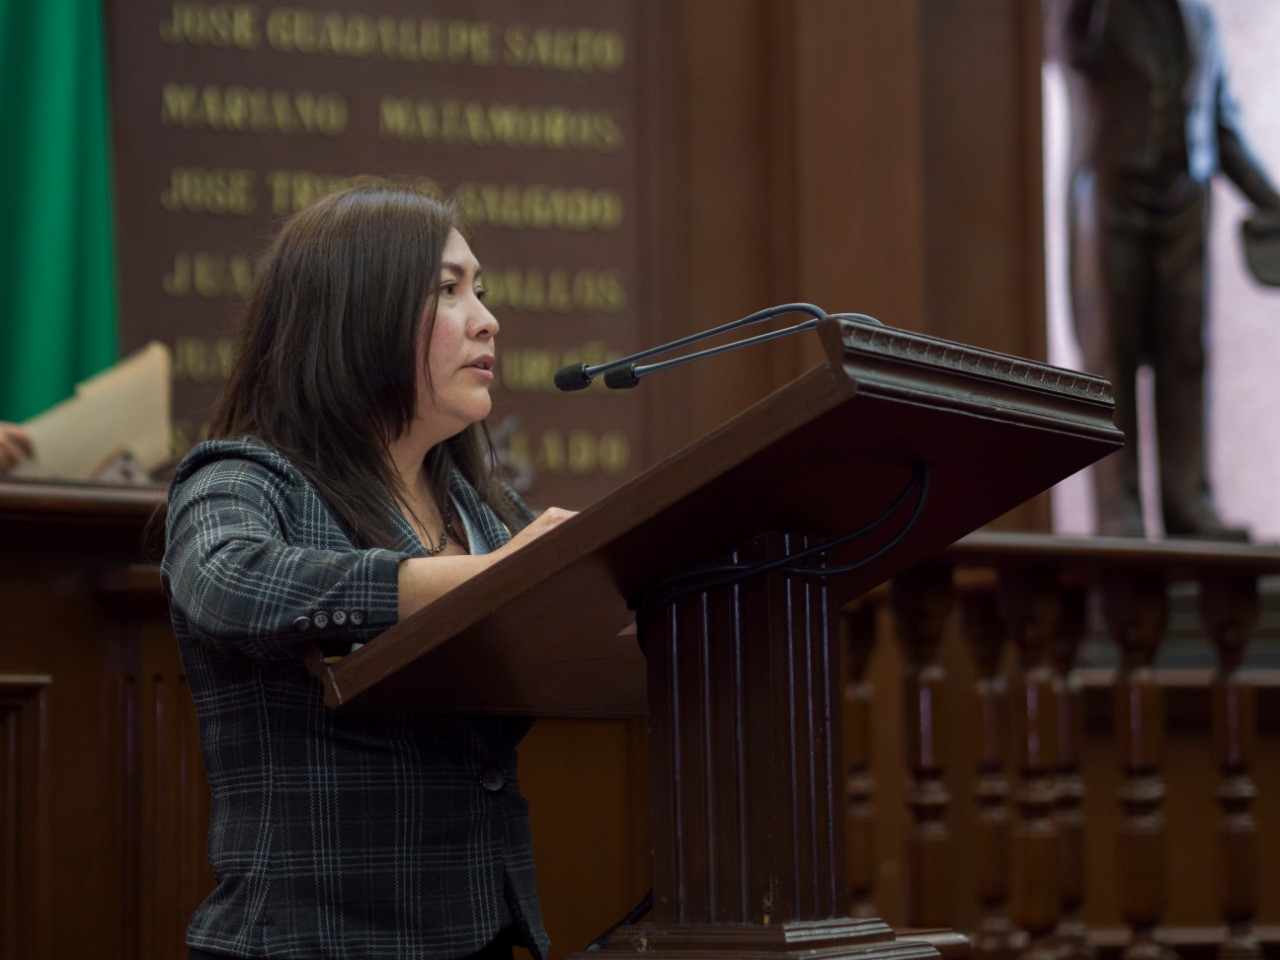 Laura Granados proposes to eliminate penalties on untimely payment of fees for services in Michoacán